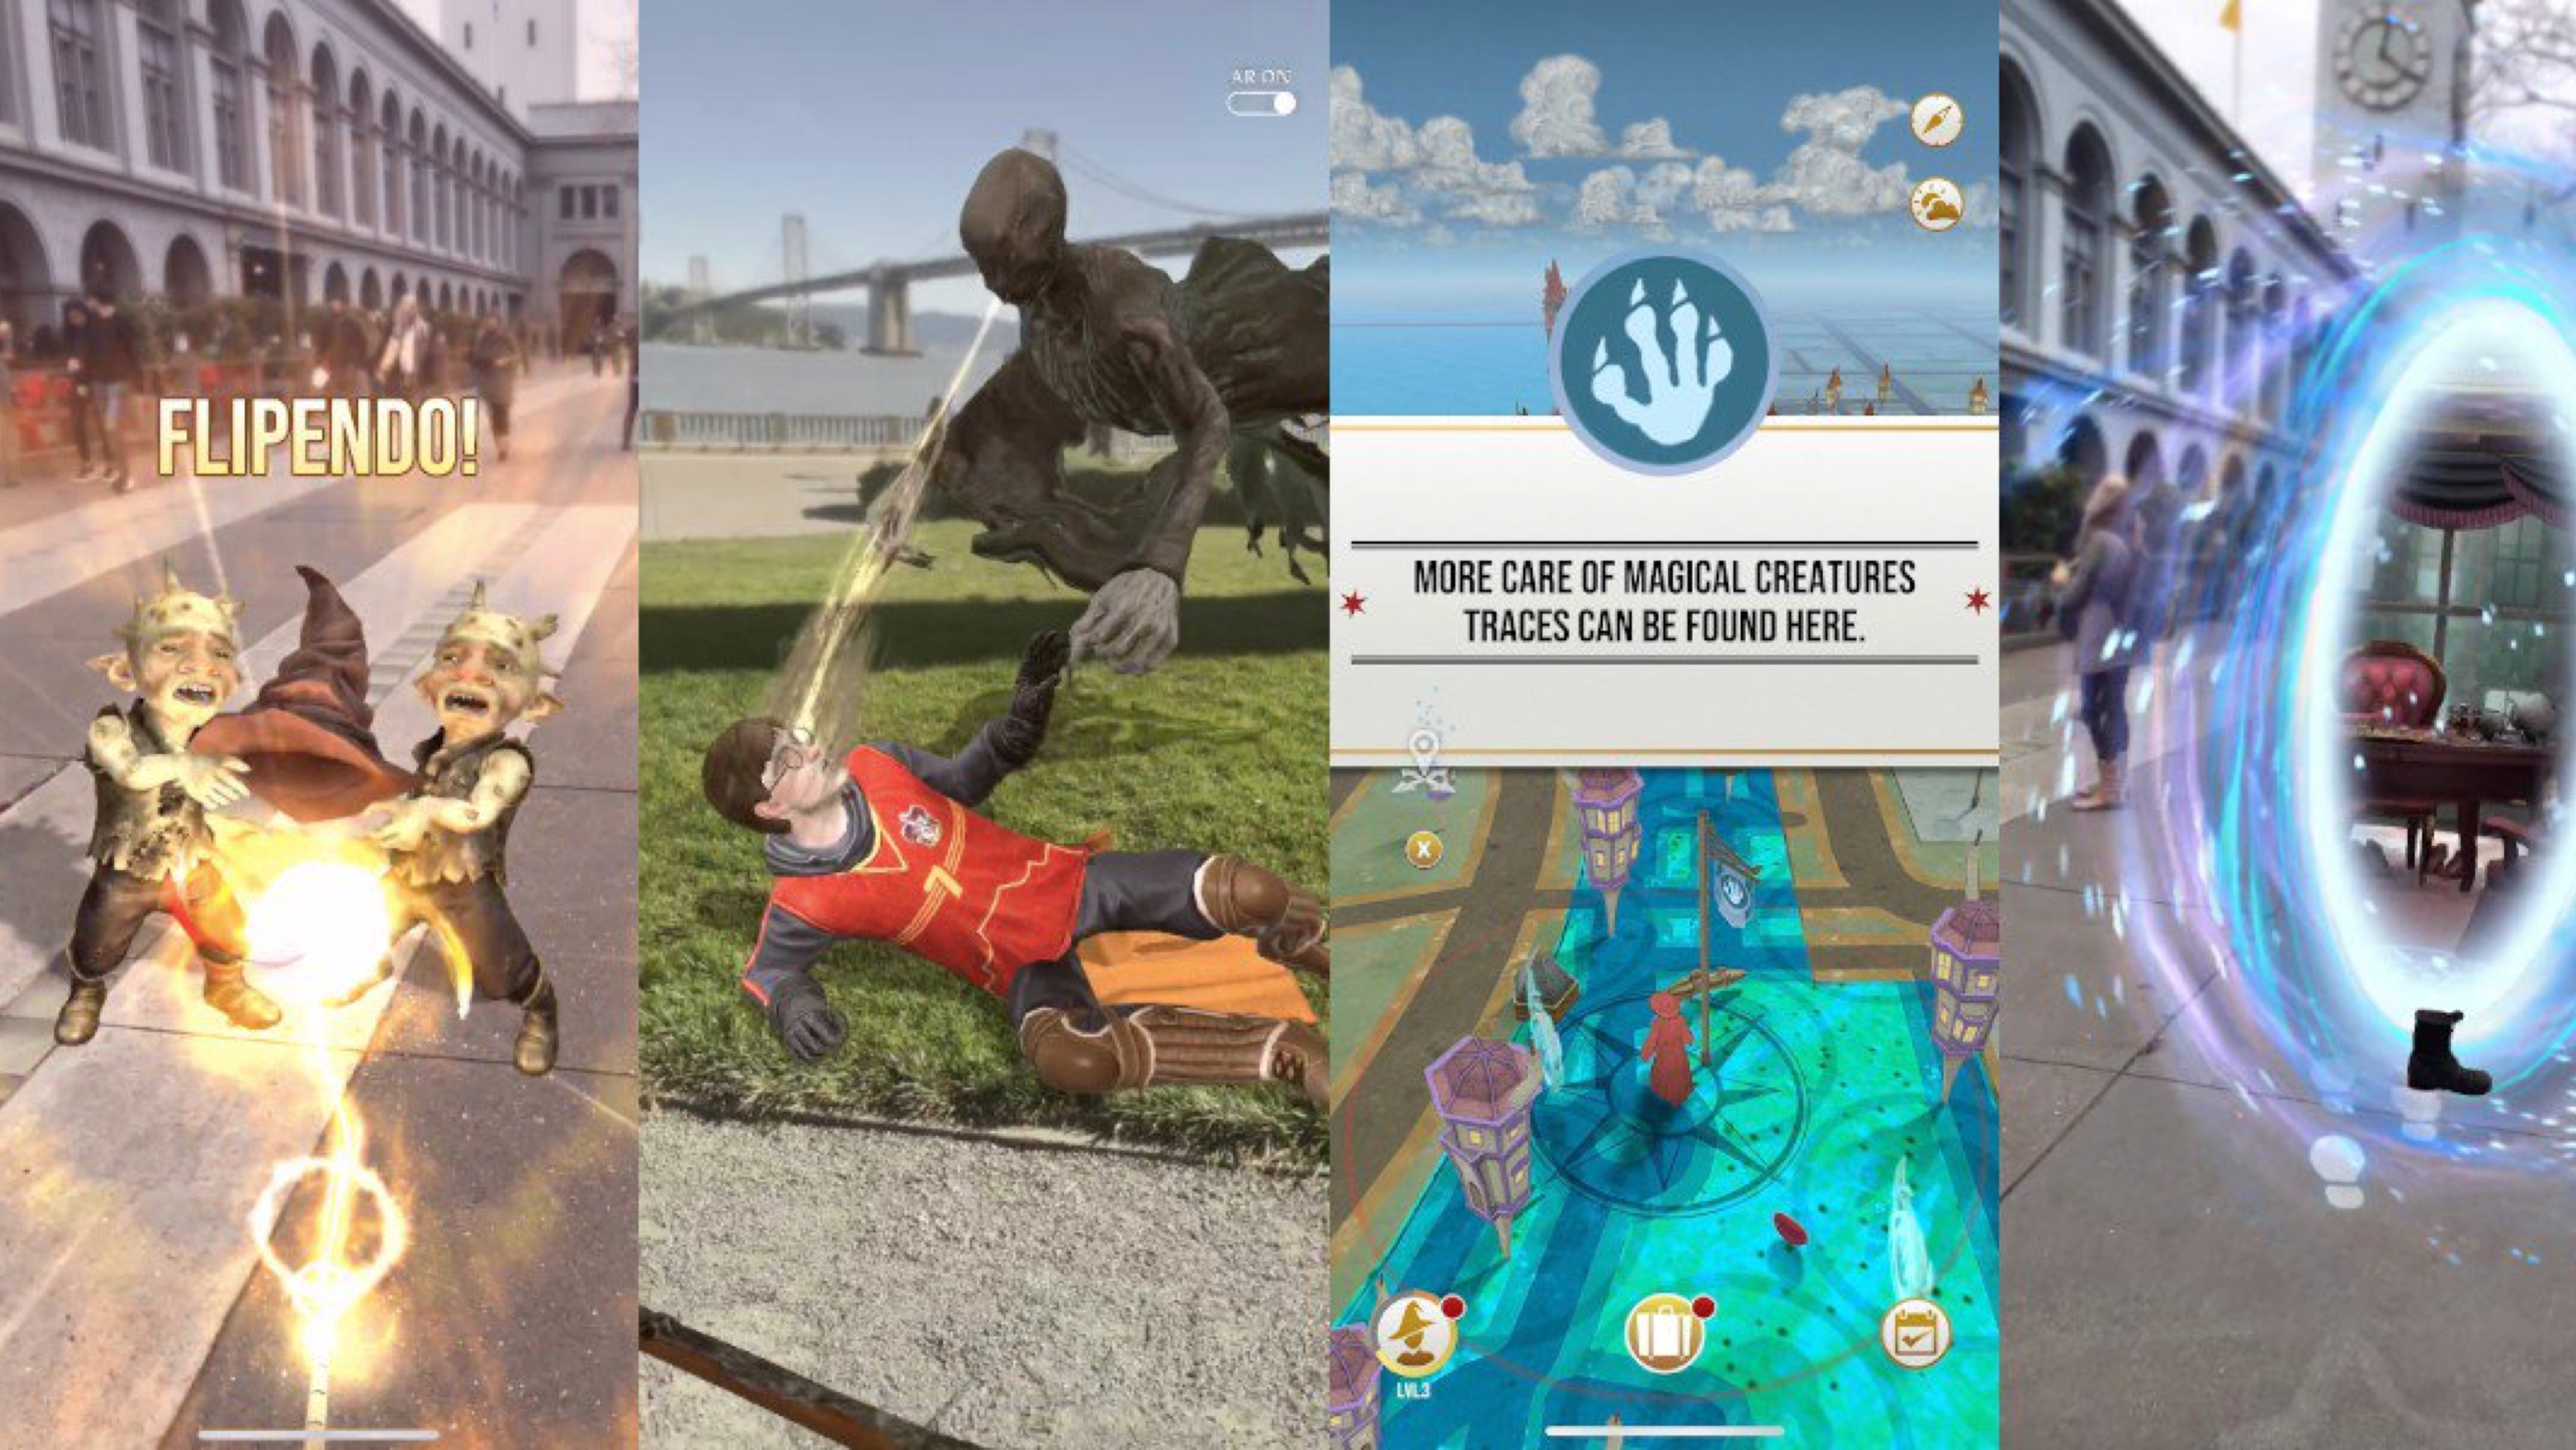 Creators of Pokemon GO Have Released a Harry Potter AR Game